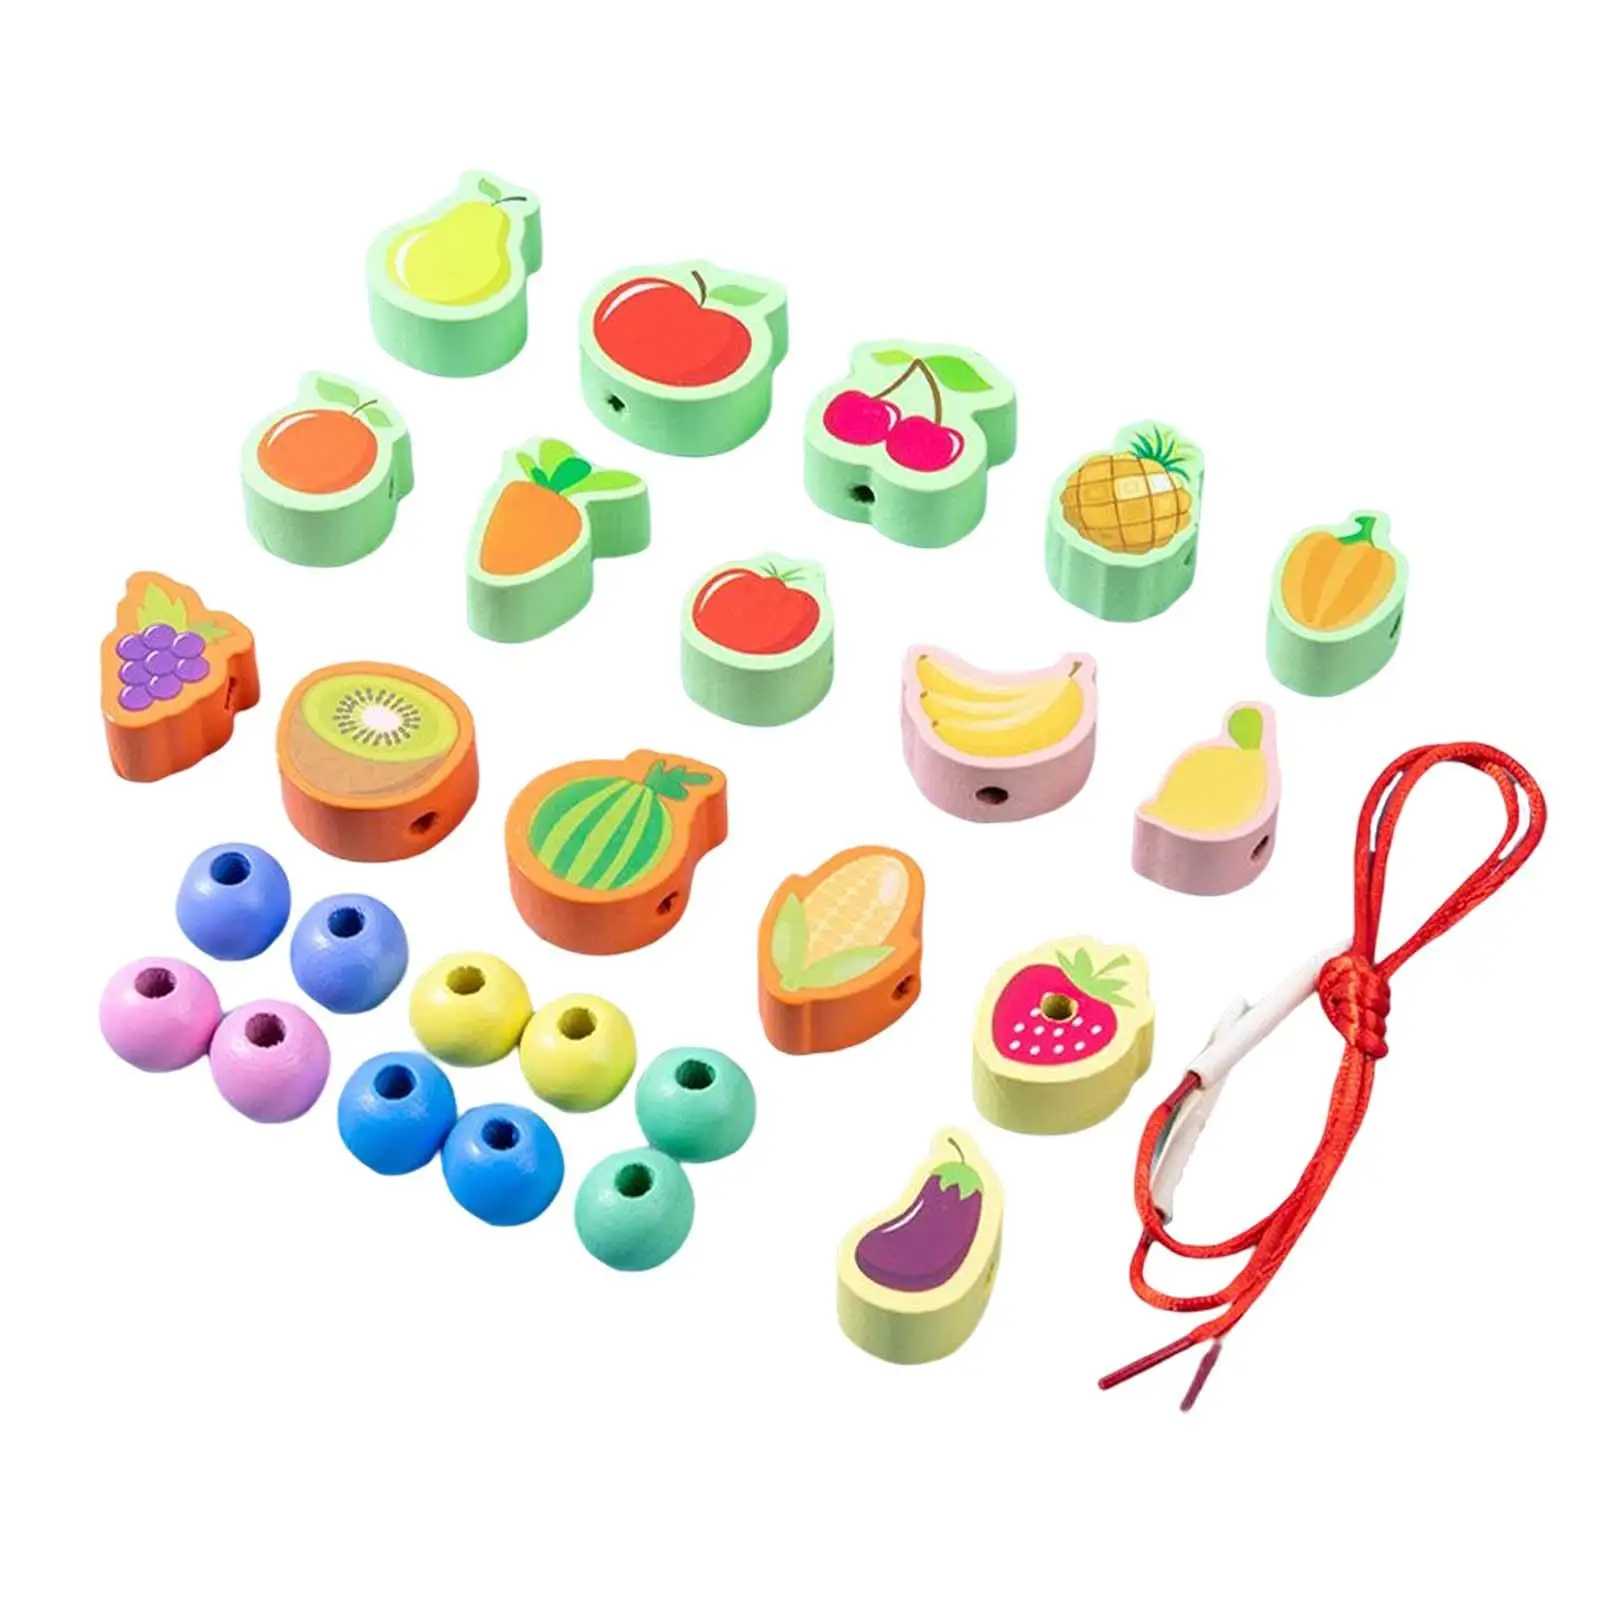 Wooden Threading Toys Developmental Toy Lacing Beads Set for Birthday Gifts images - 6